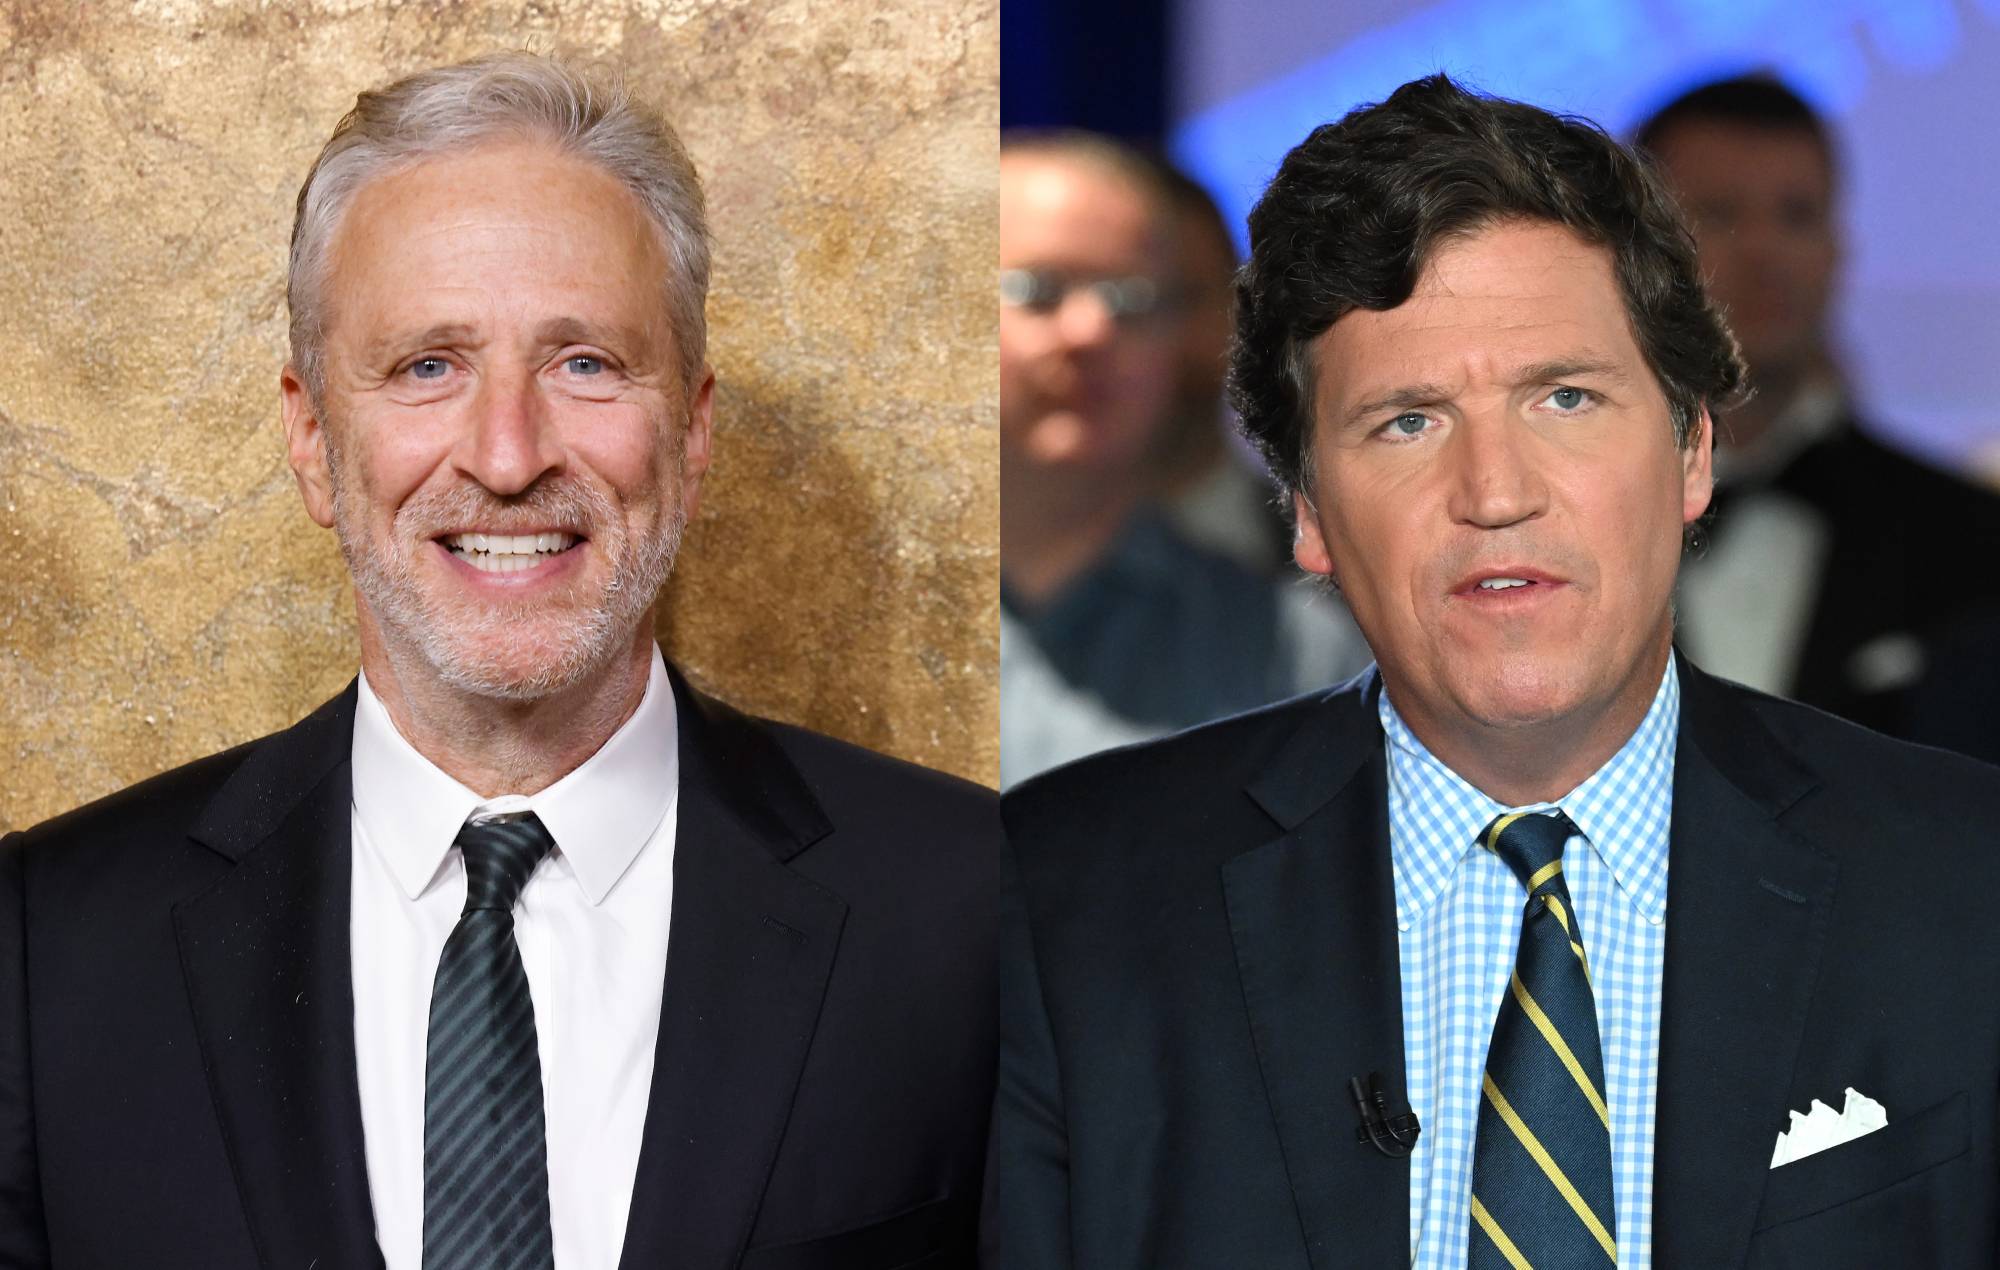 Jon Stewart lays into Tucker Carlson: “You’re such a dick”